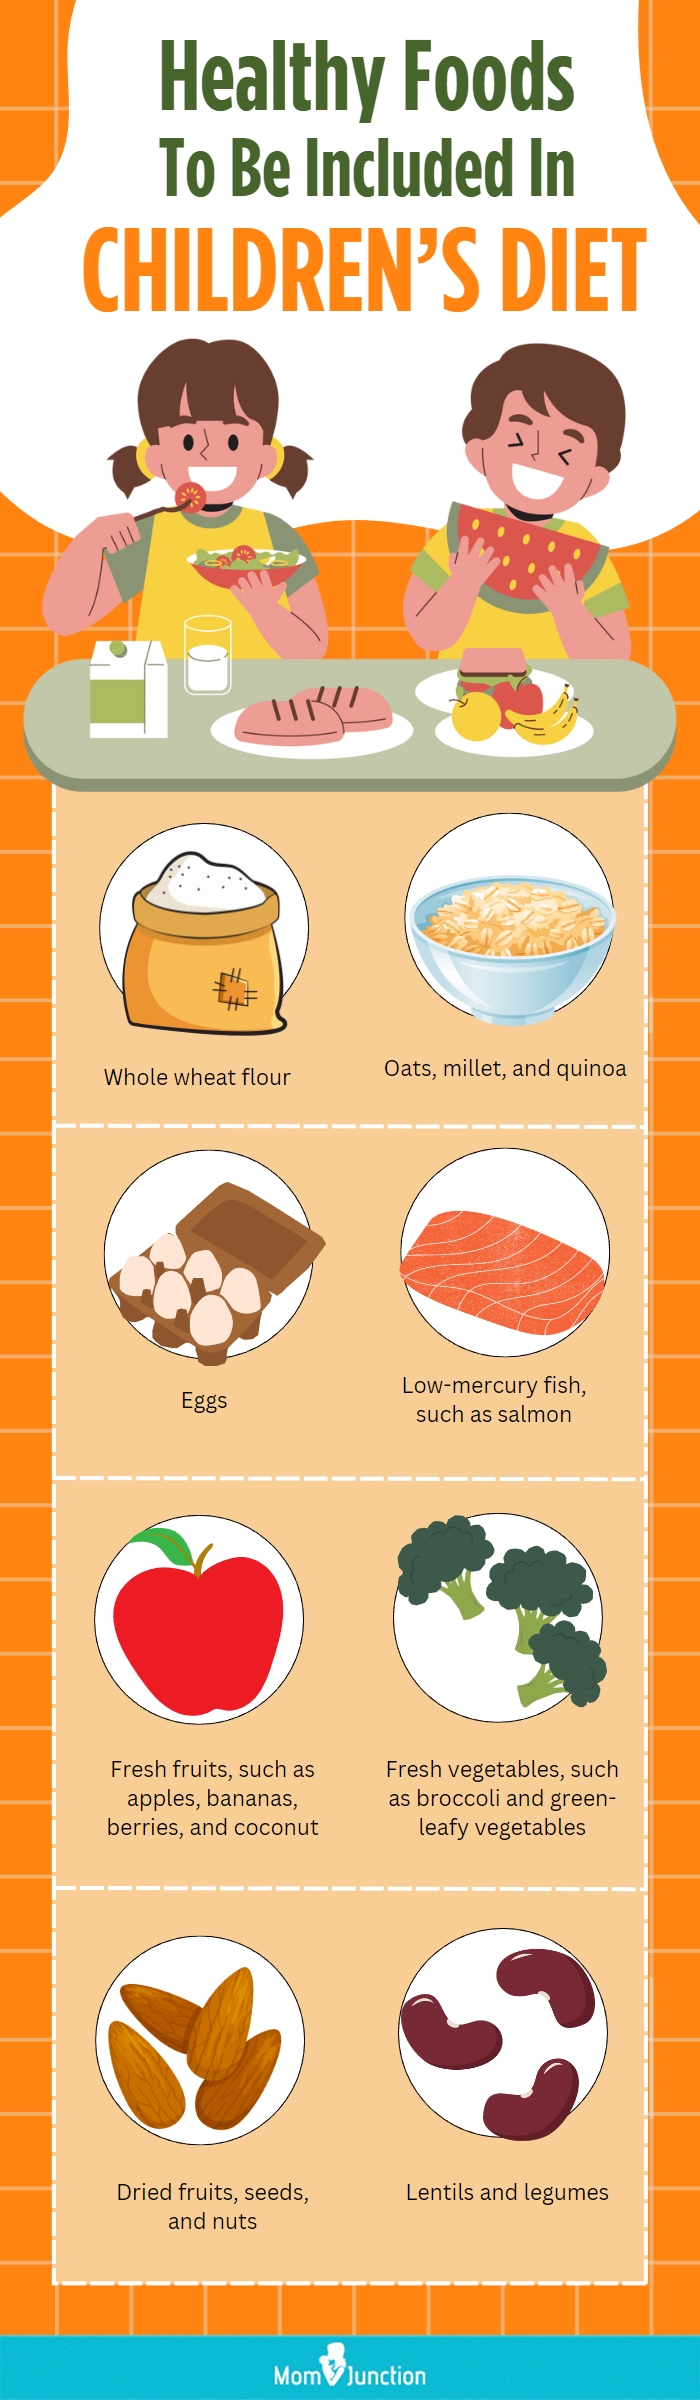 healthy foods to be included in children hs diet (infographic)